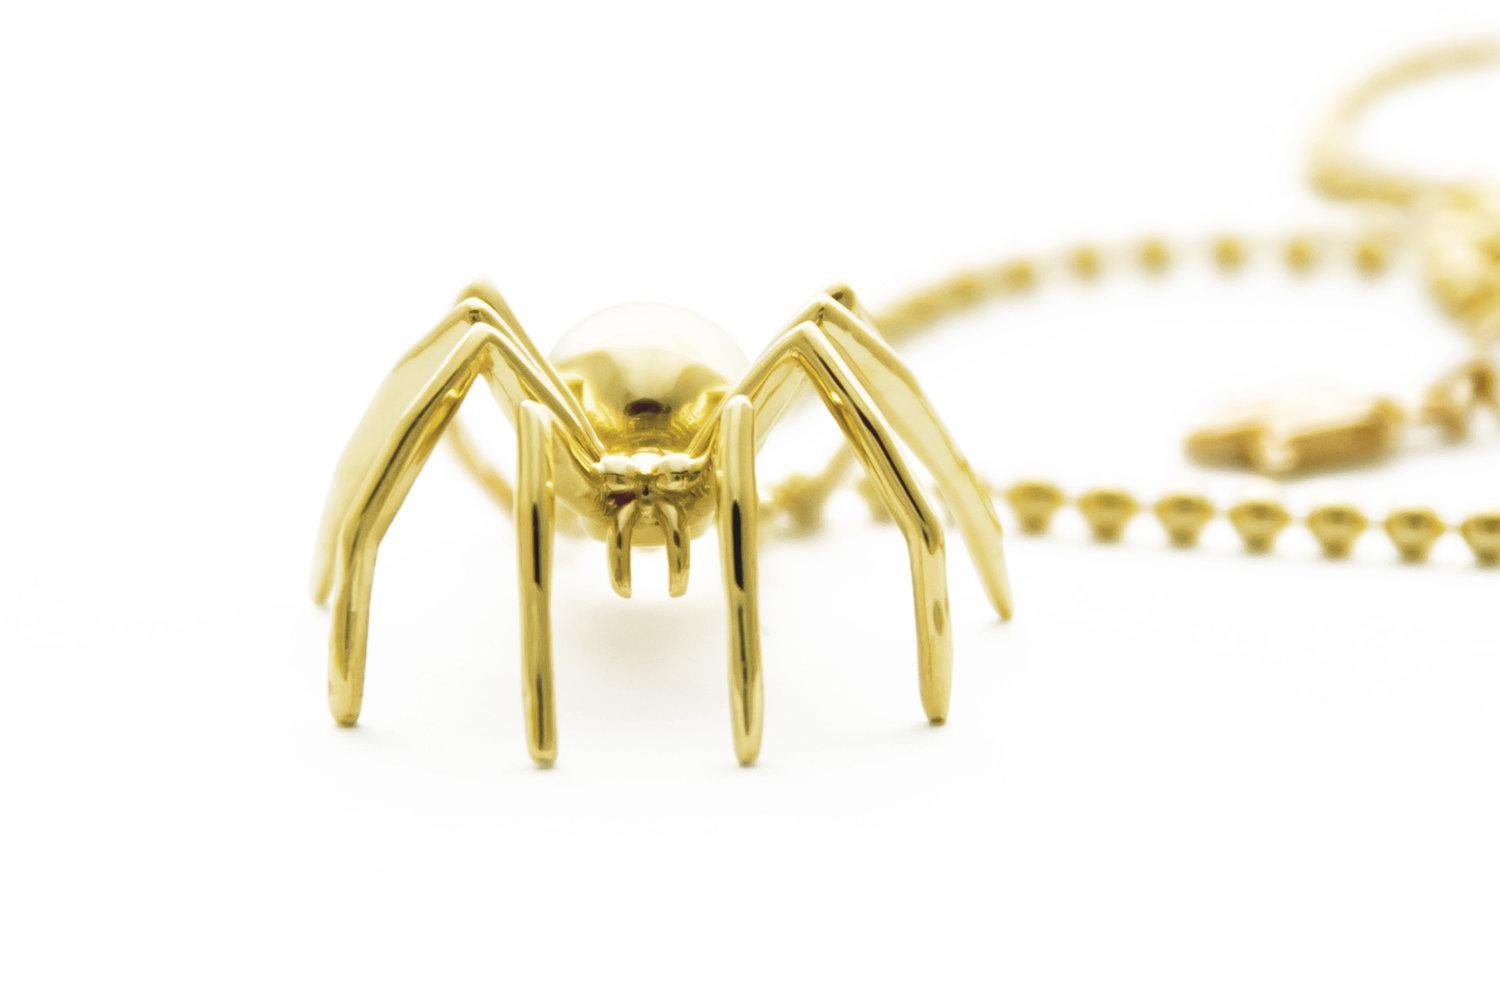 Introducing the captivating Medium Spider Pendant Solid Yellow Gold, an exquisite representation of creativity and self-determination. Throughout history, the spider has symbolized the master of its own destiny, captivating our imagination and